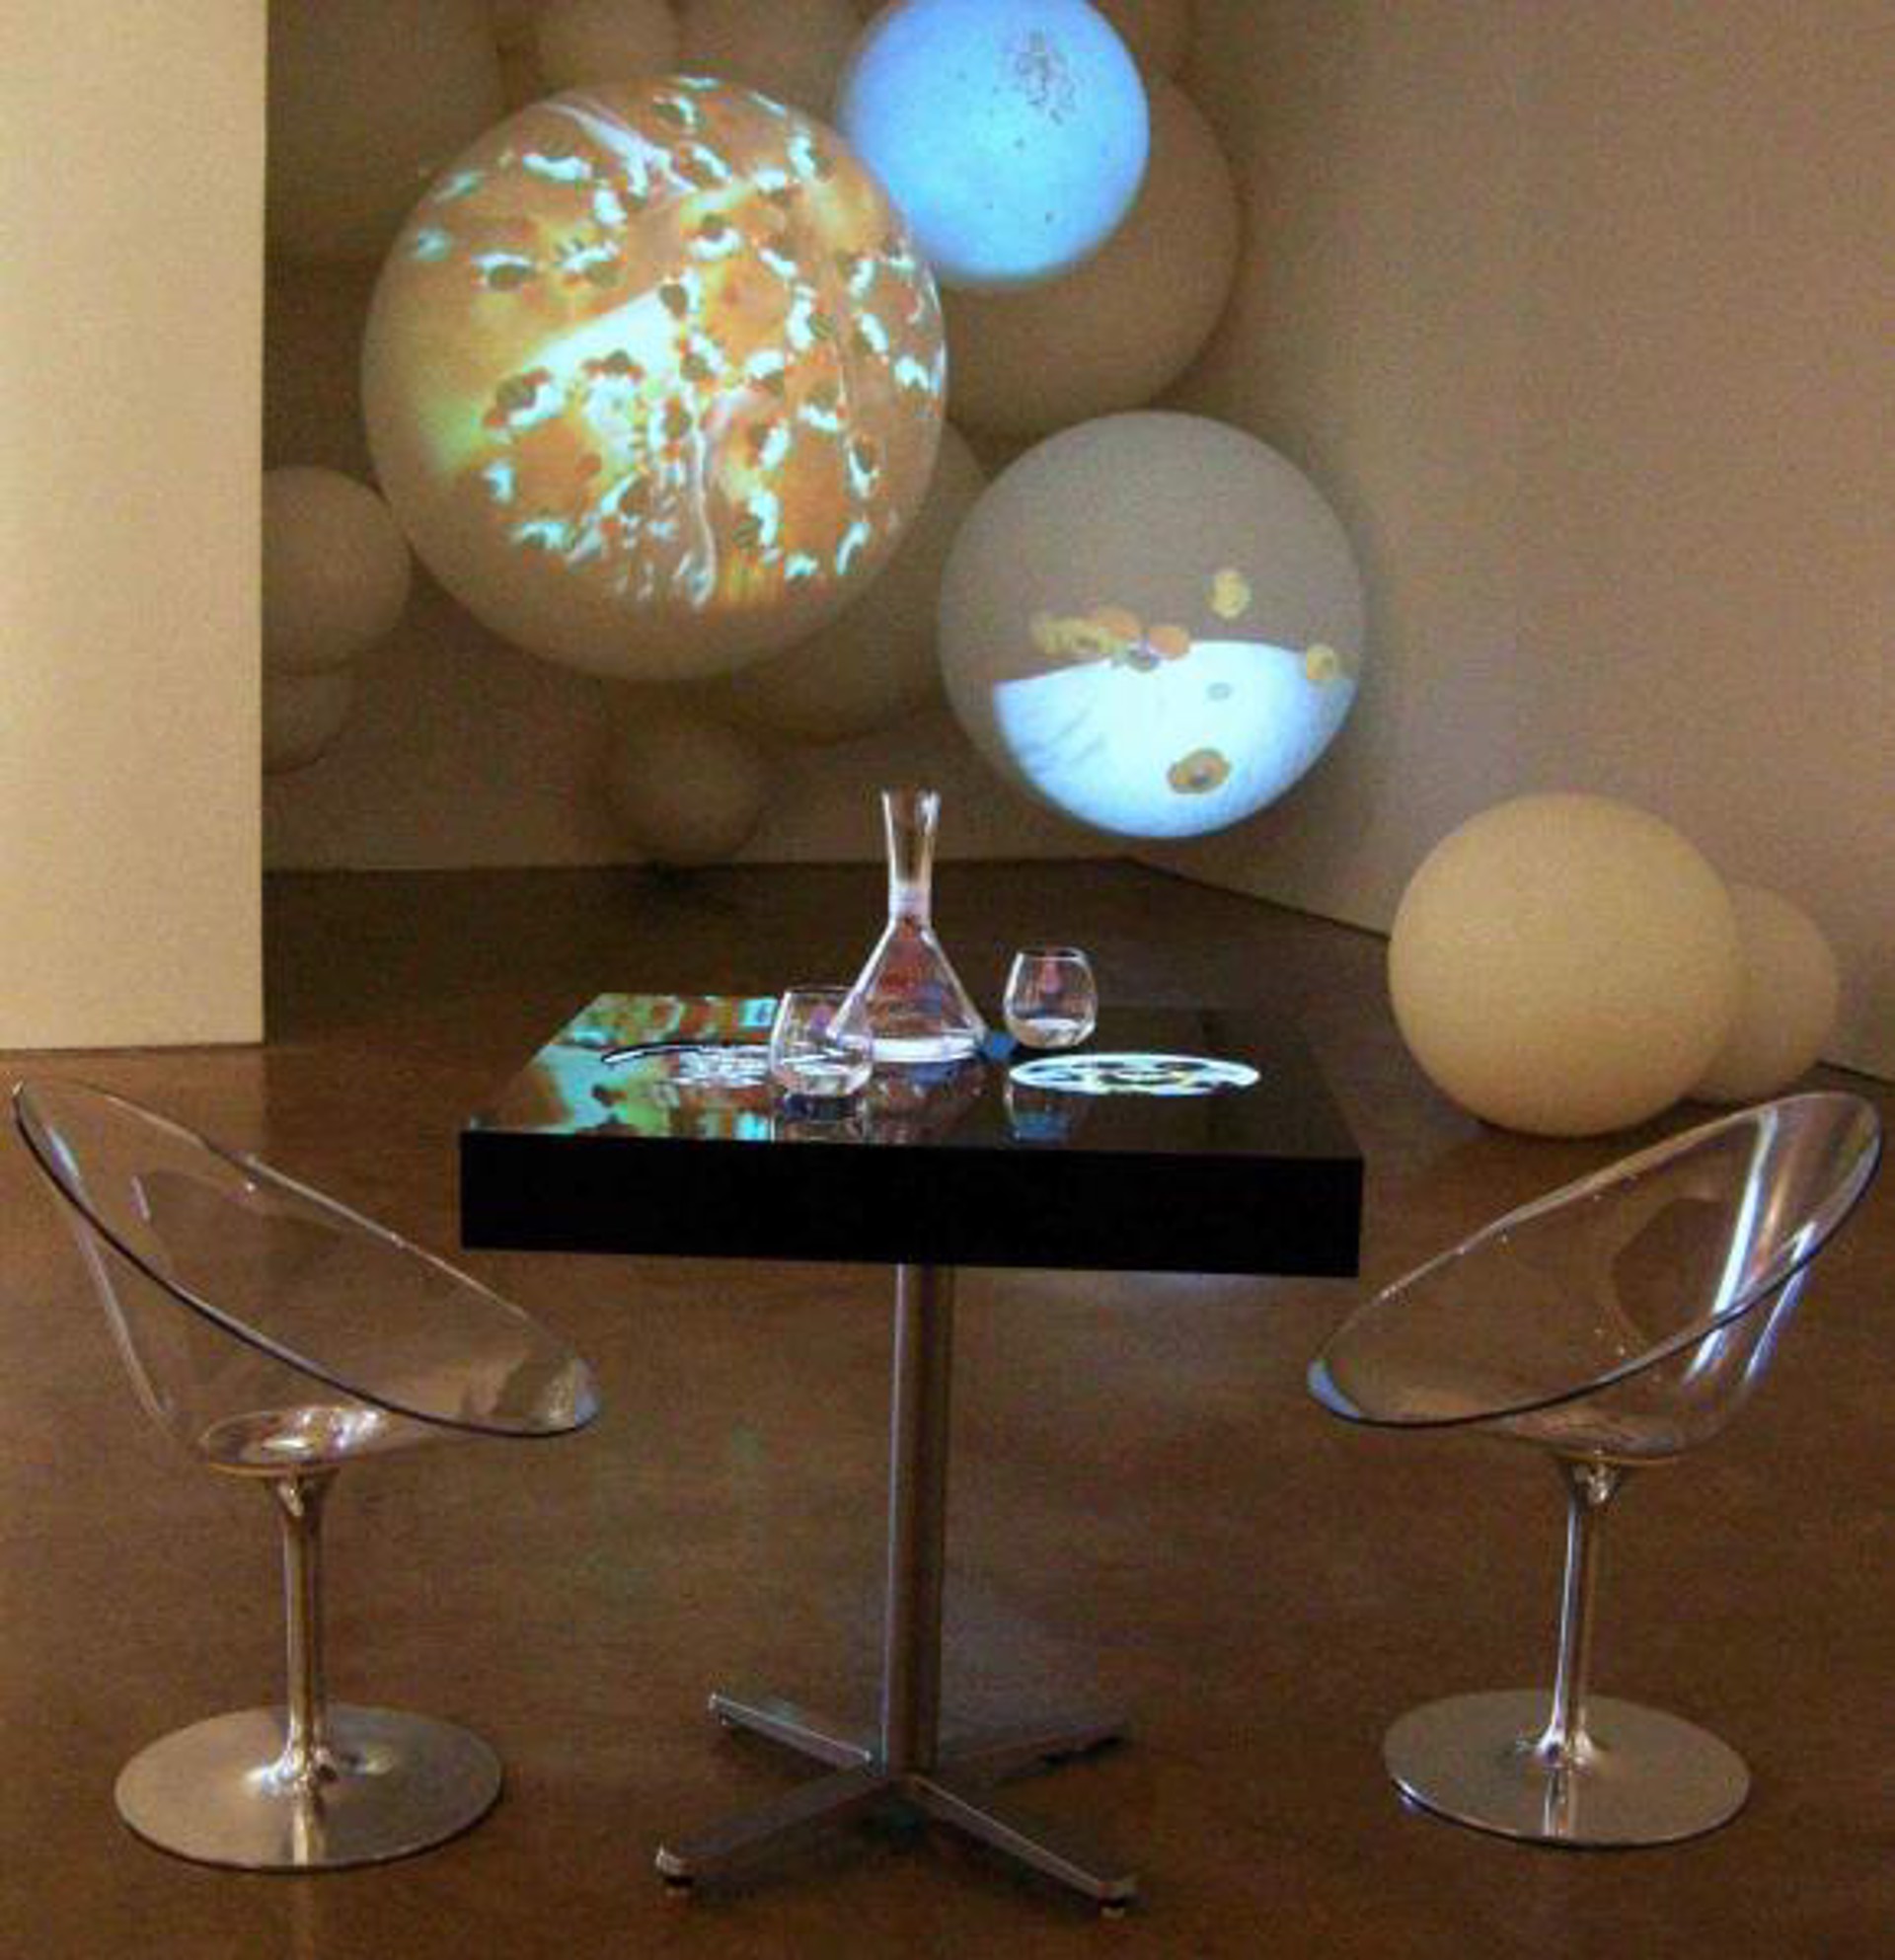 Installation: Multiverse and Supper for Two by Katja Loher